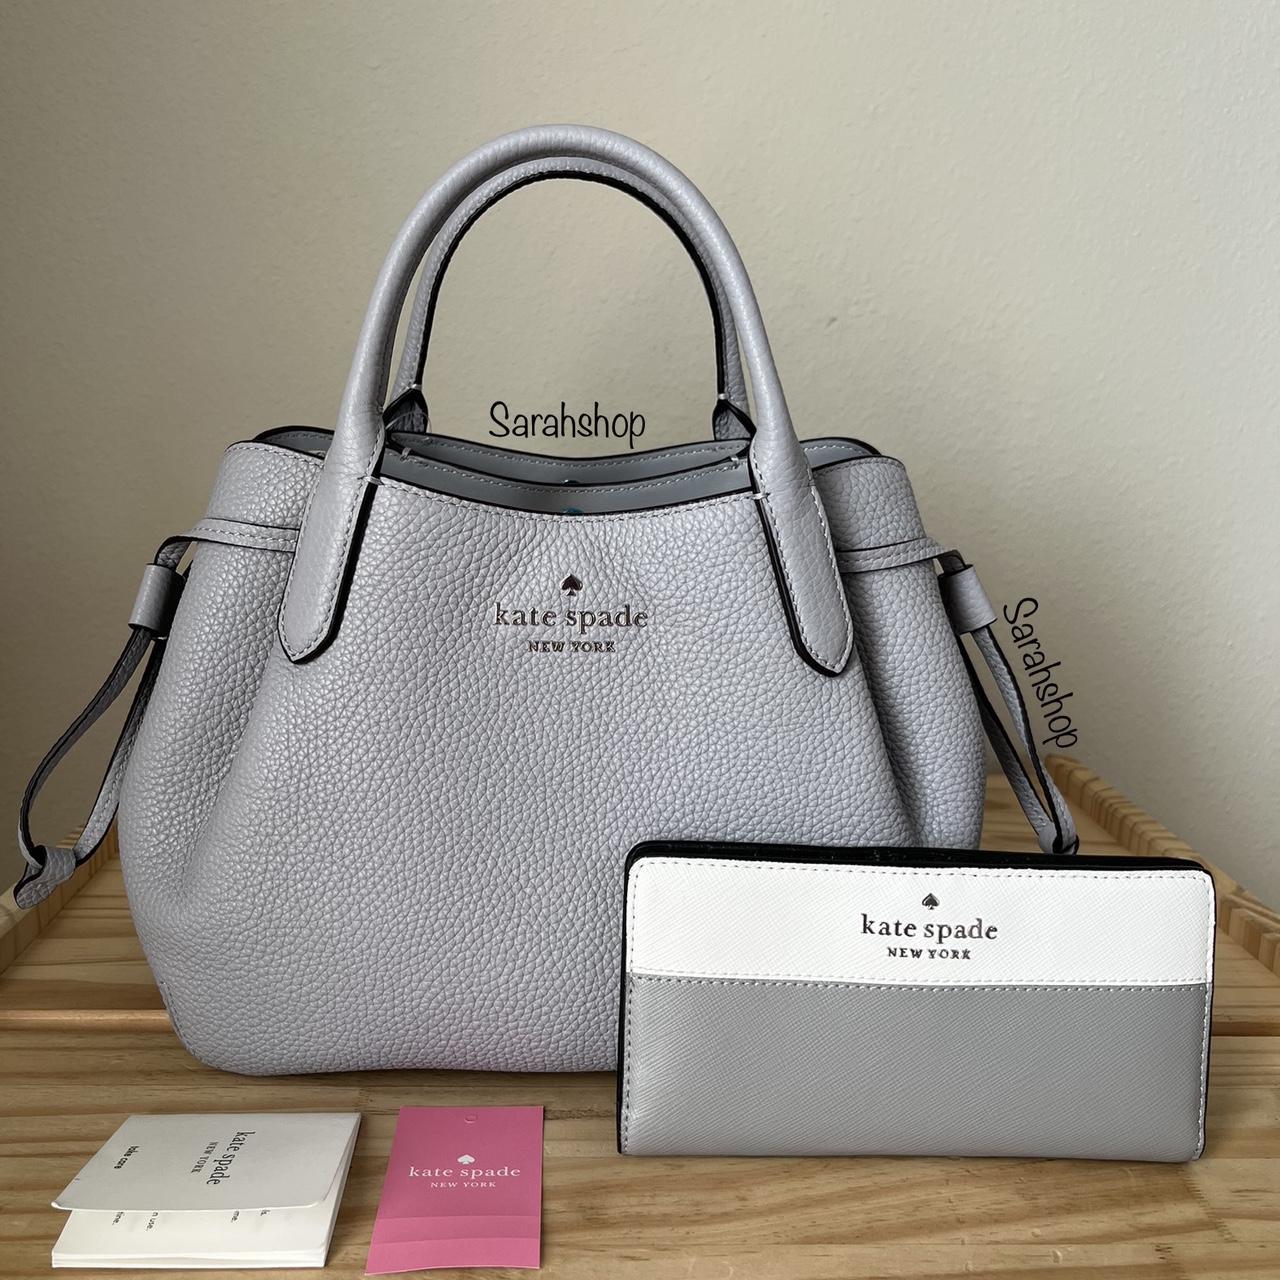 Kate Spade Bag - Brand New with Tag